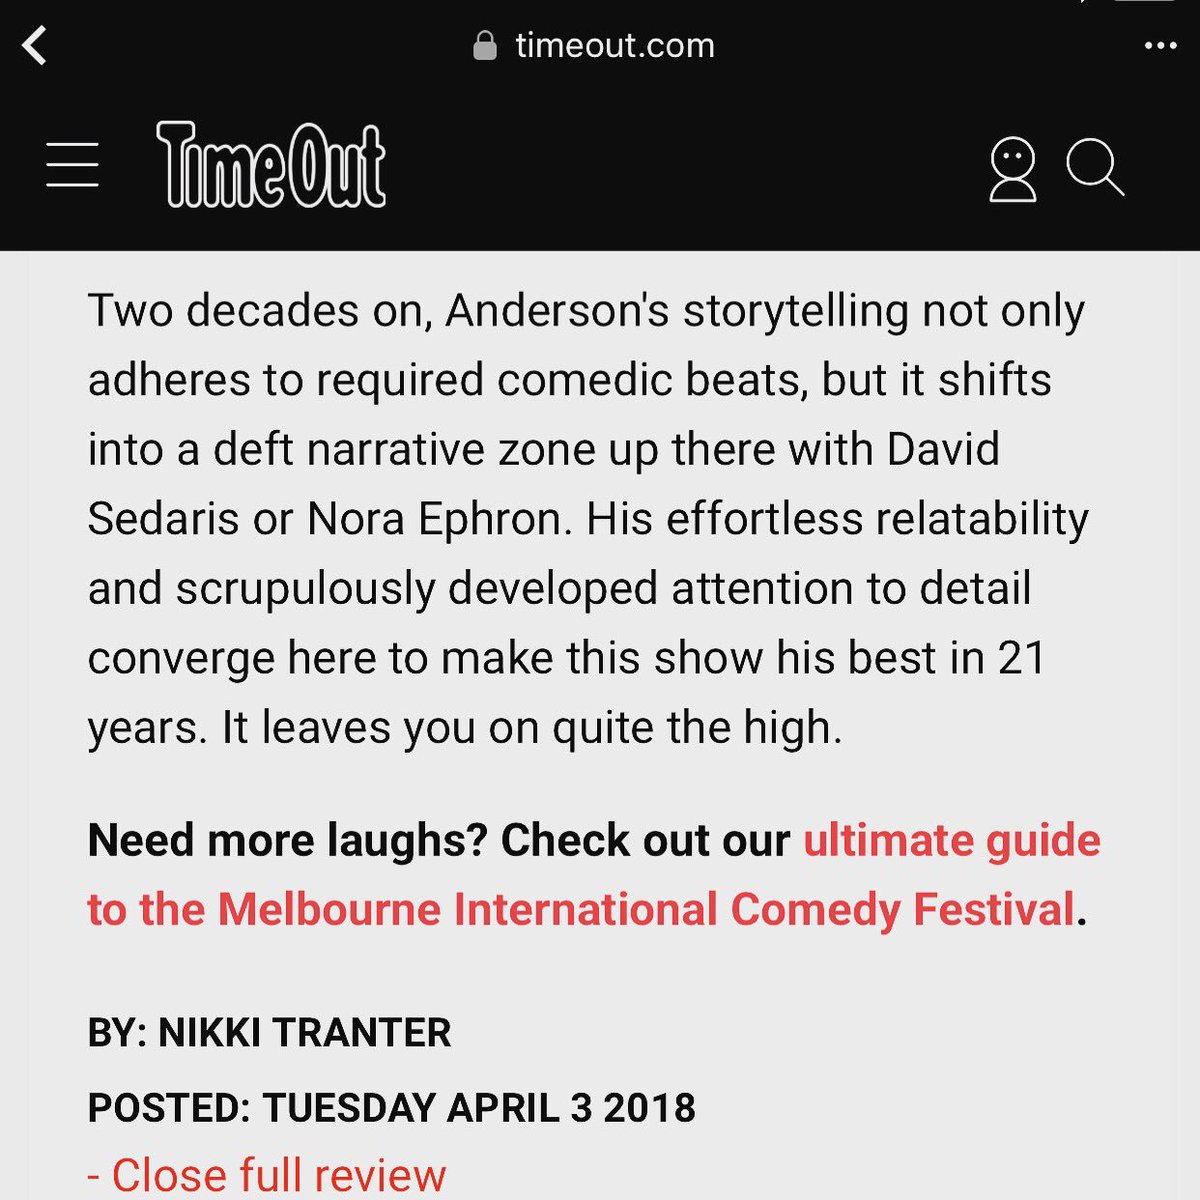 RT @Wil_Anderson: Wilegal @SydOperaHouse October 13 https://t.co/7QFaPoRZh4